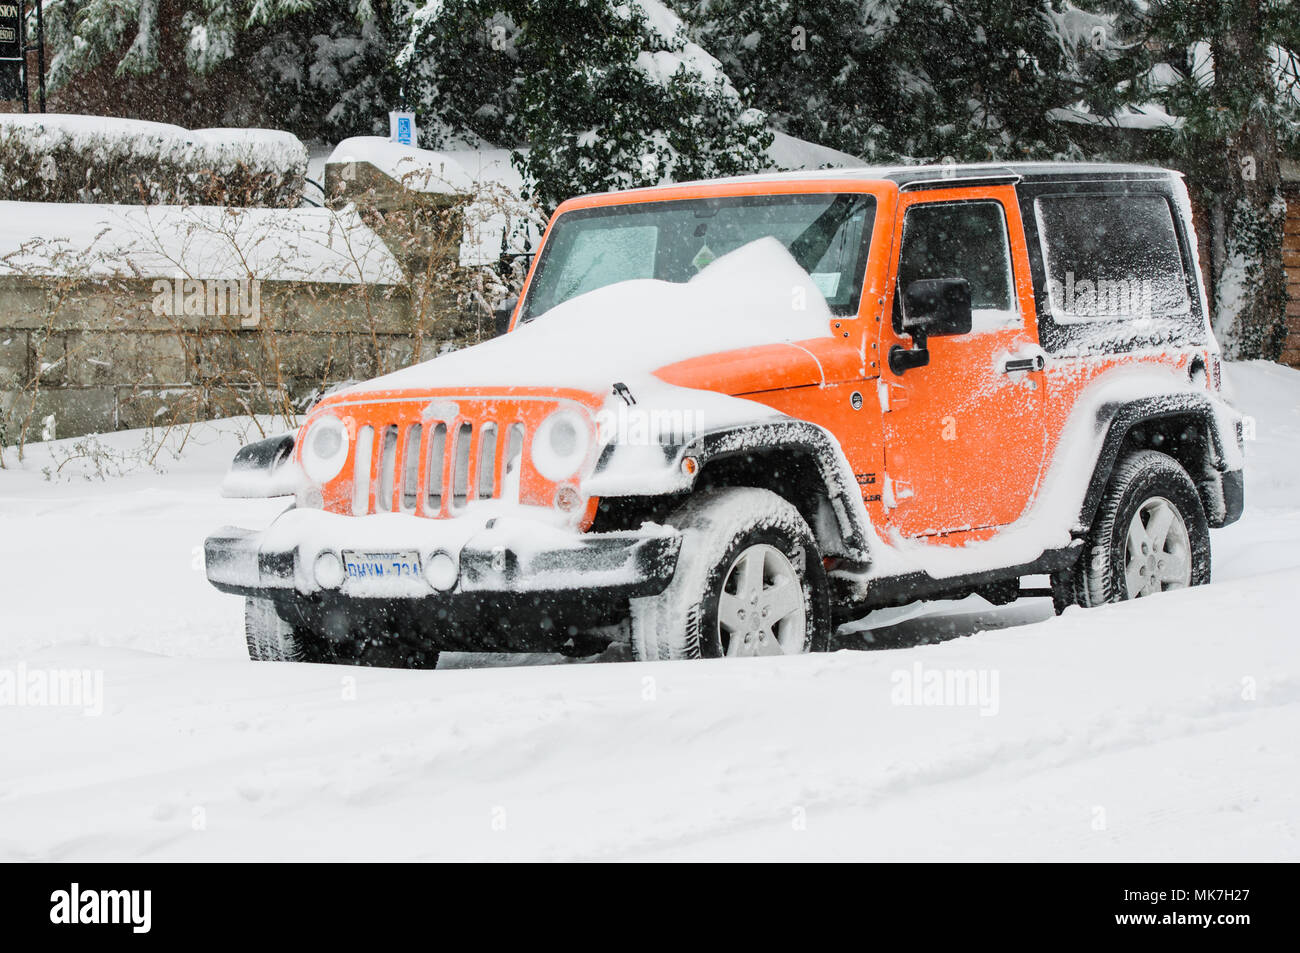 Hamilton, Ontario, Canada - February 2013: A snow covered jeep parked at the roadside during severe snowfall Stock Photo